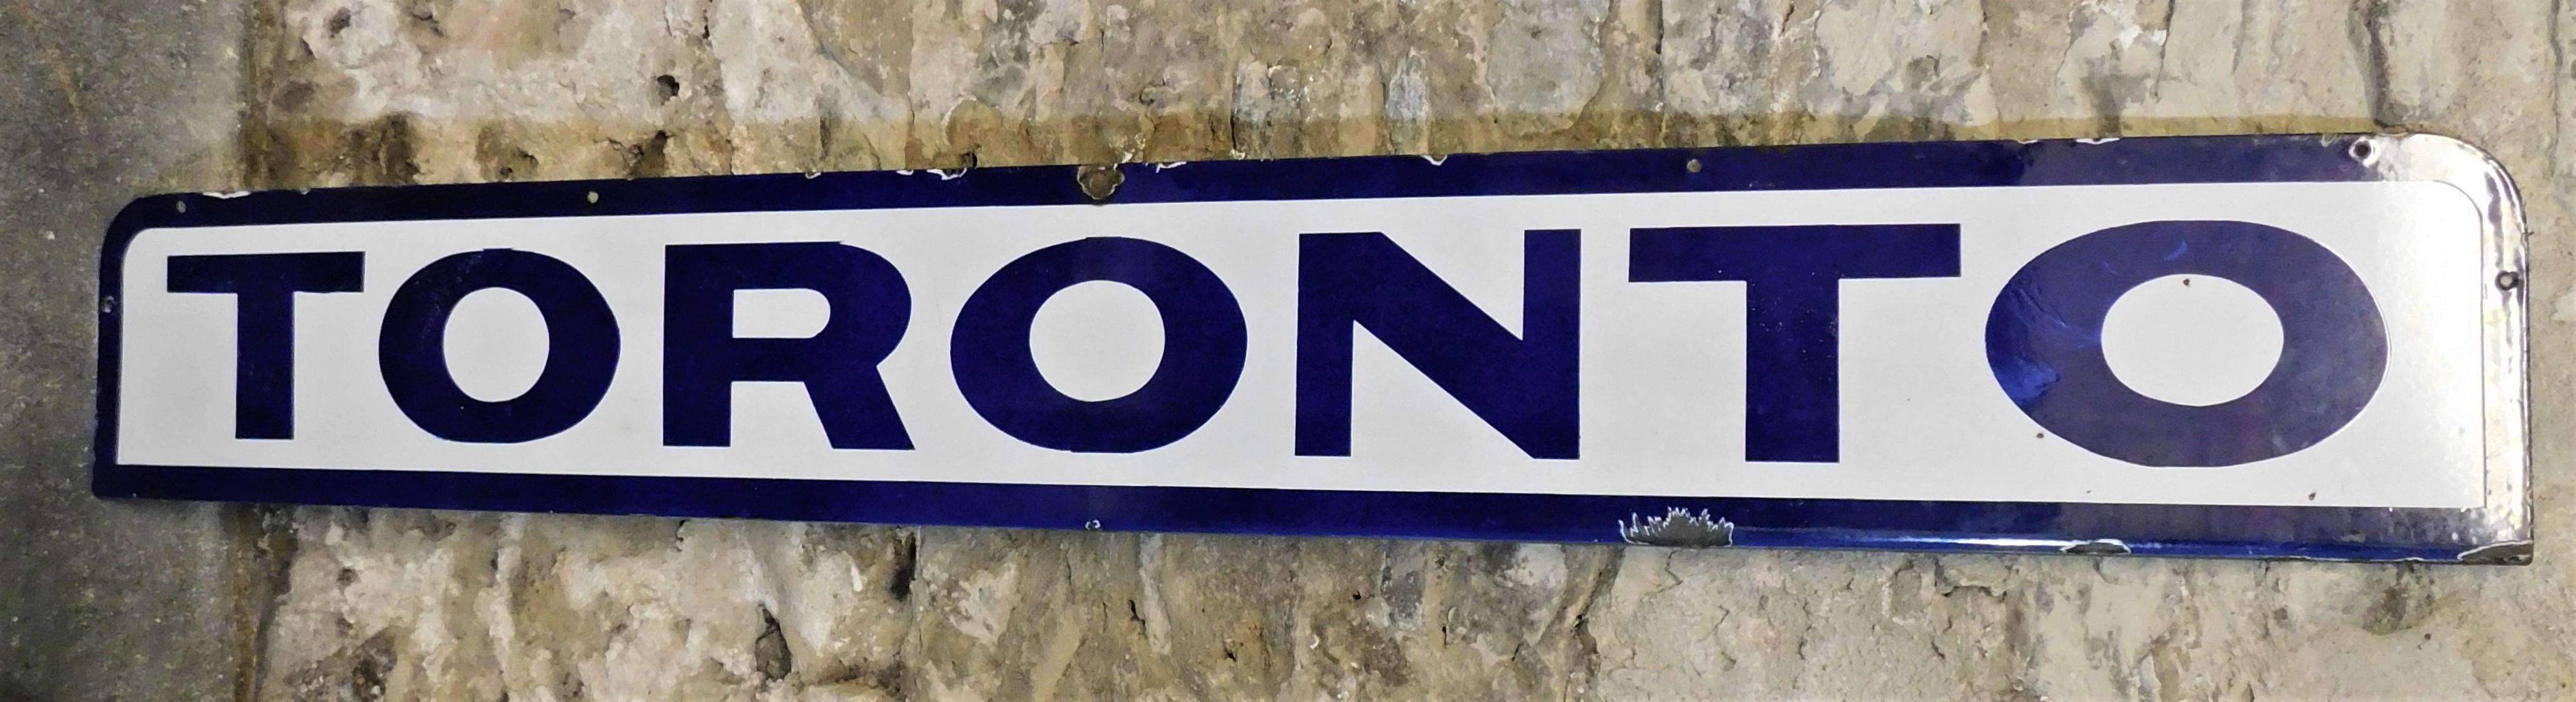 Large five foot long Toronto one sided porcelain or enamel sign. Even though this sign is the blue and white of the Toronto Maple Leafs in Ontario Canada, it is said to have come from a train station in Toronto Ohio, USA. Has a one inch lip at the